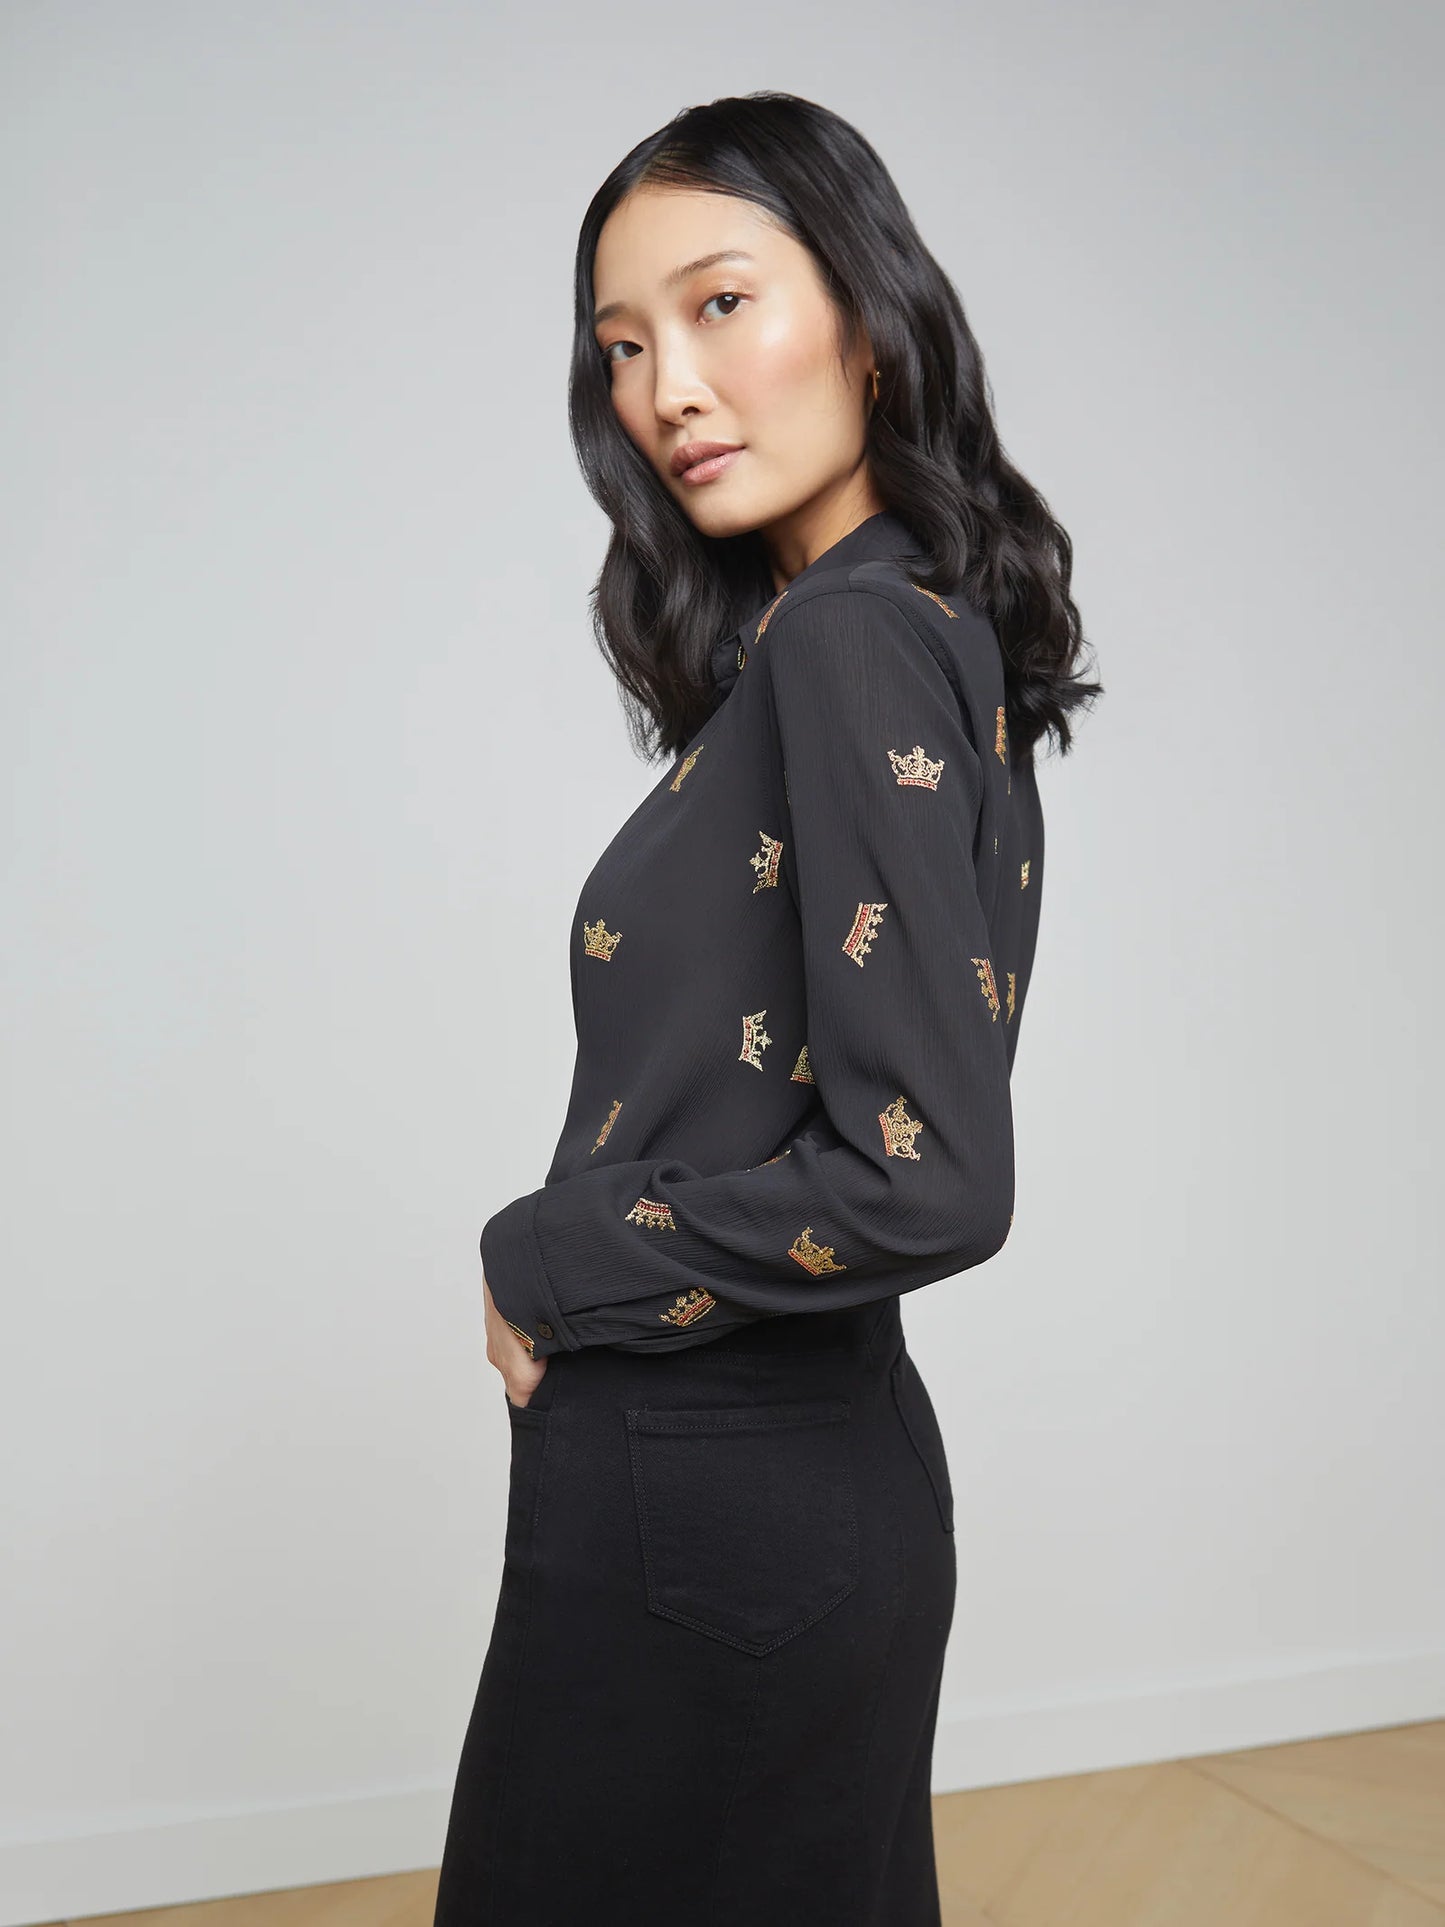 Laurent Blouse Black Gold Crown Embroidery - L'AGENCE